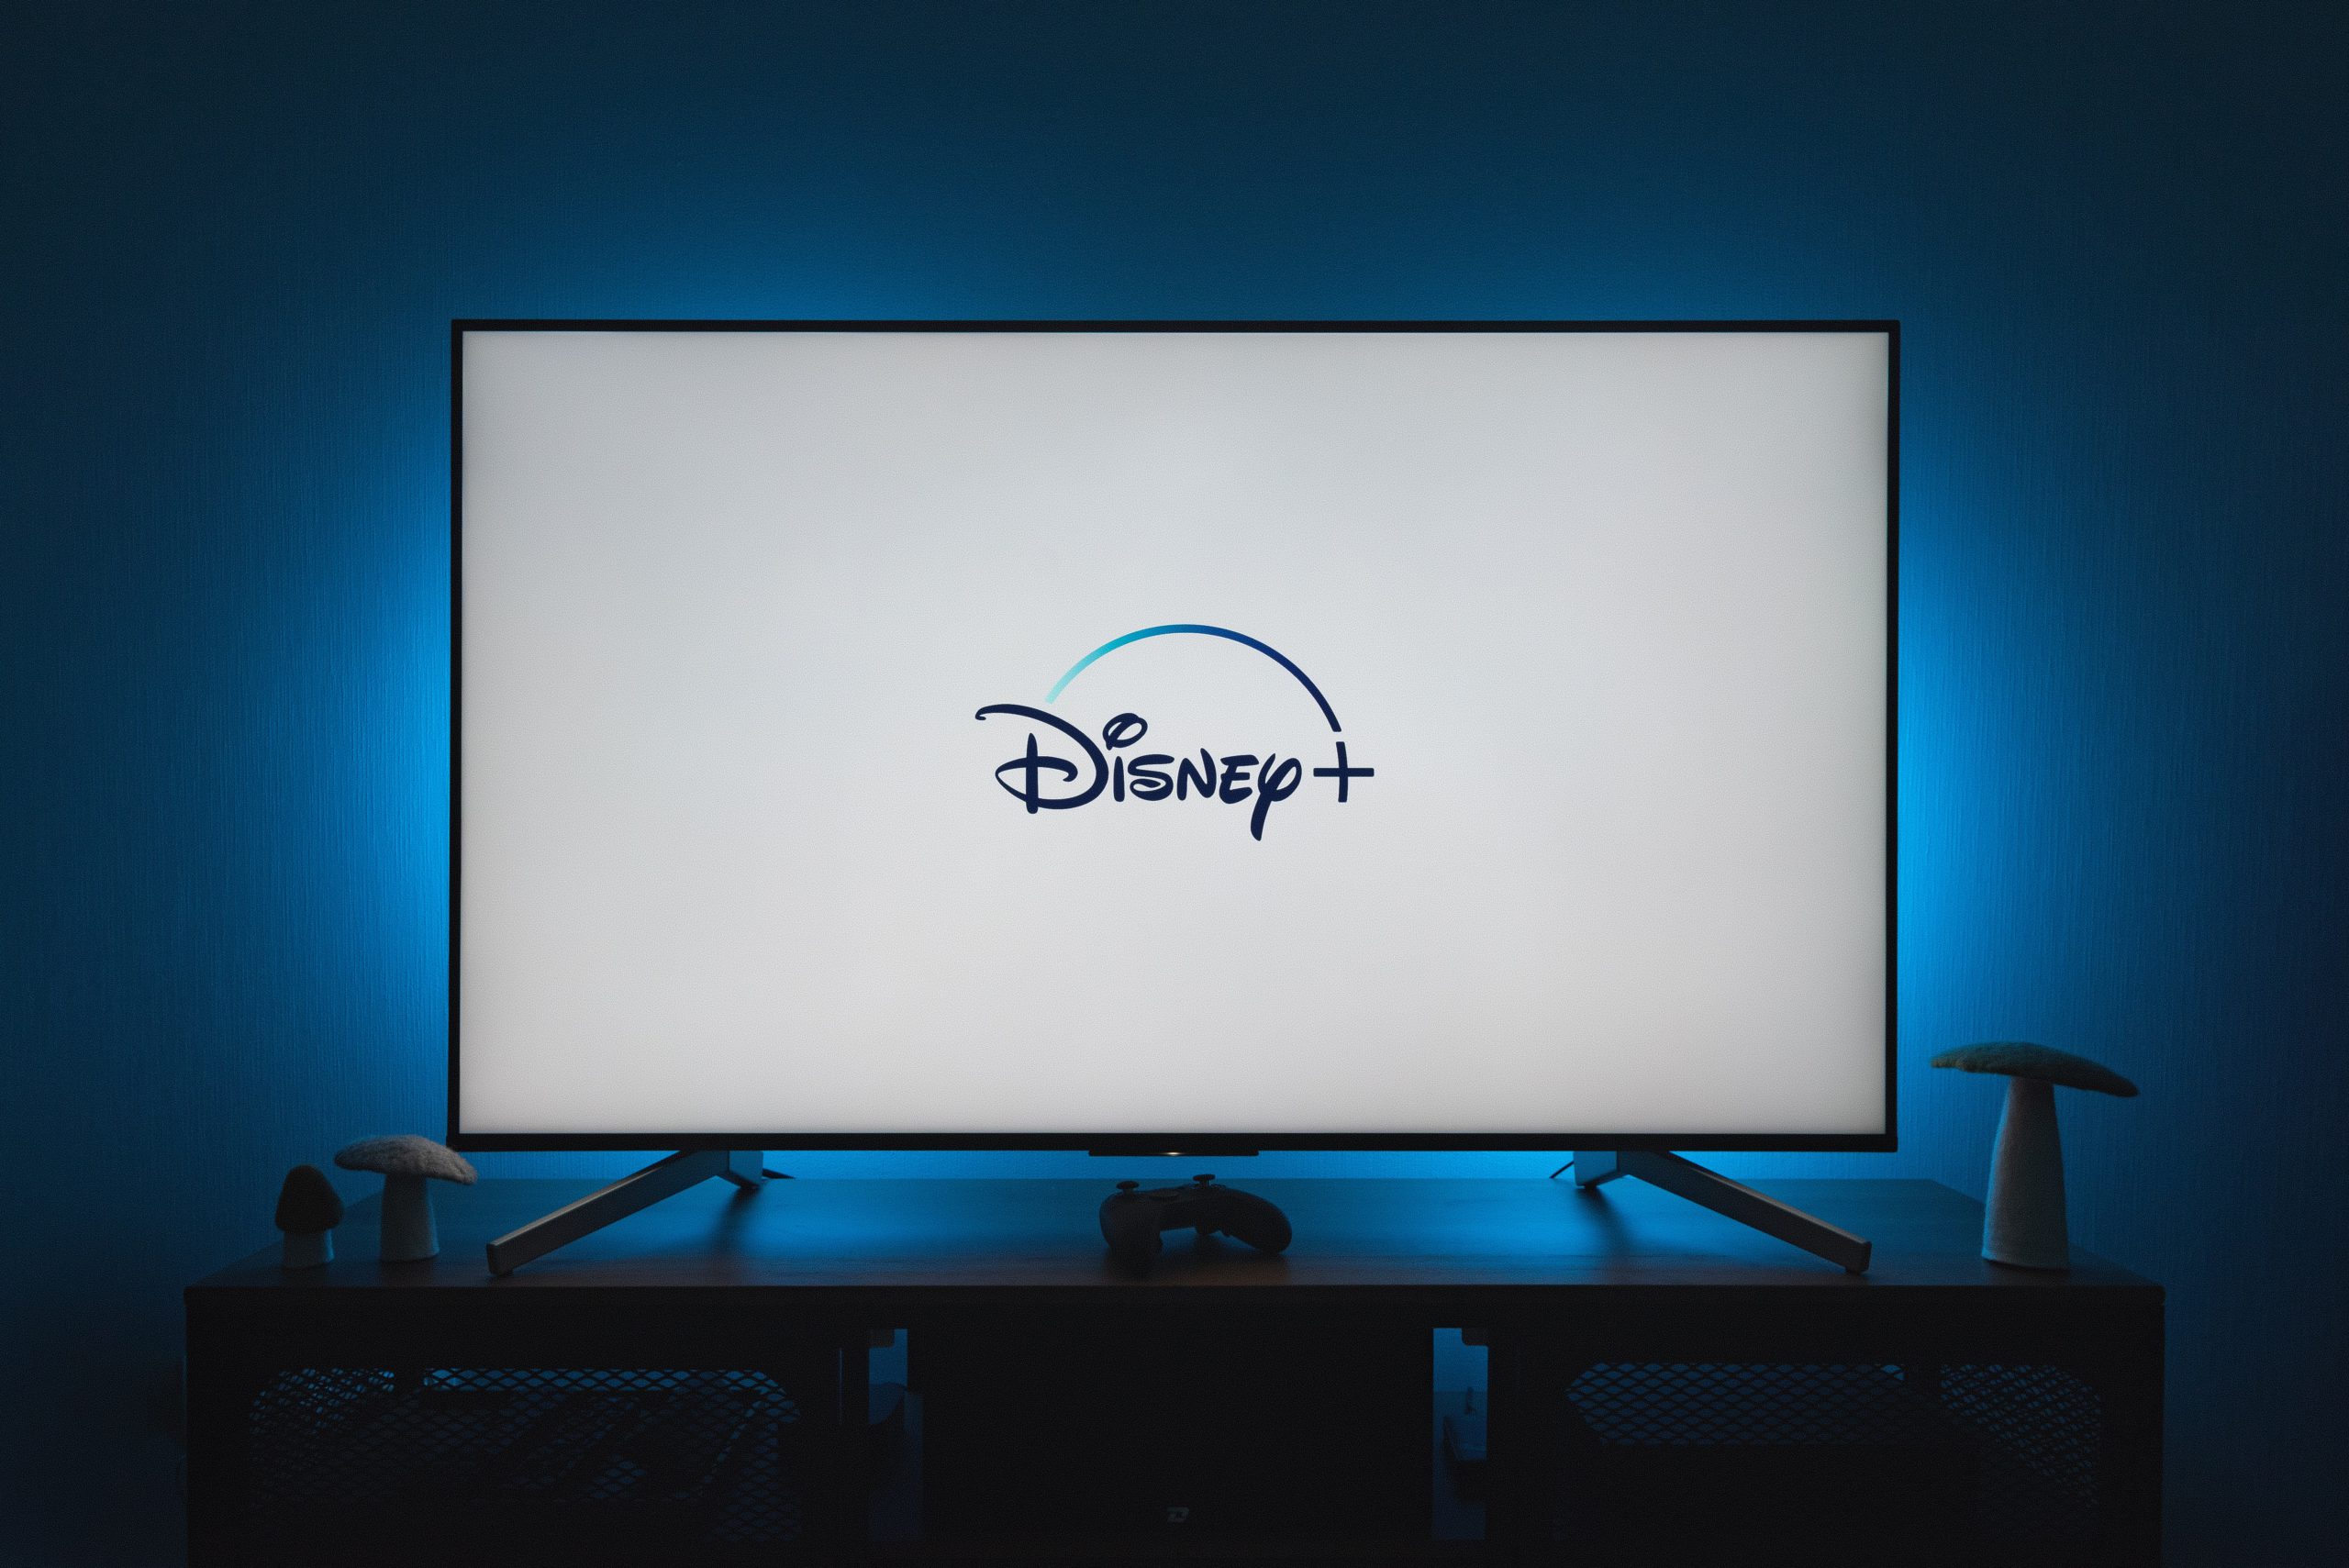 Image of a television with the Disney+ logo on the screen